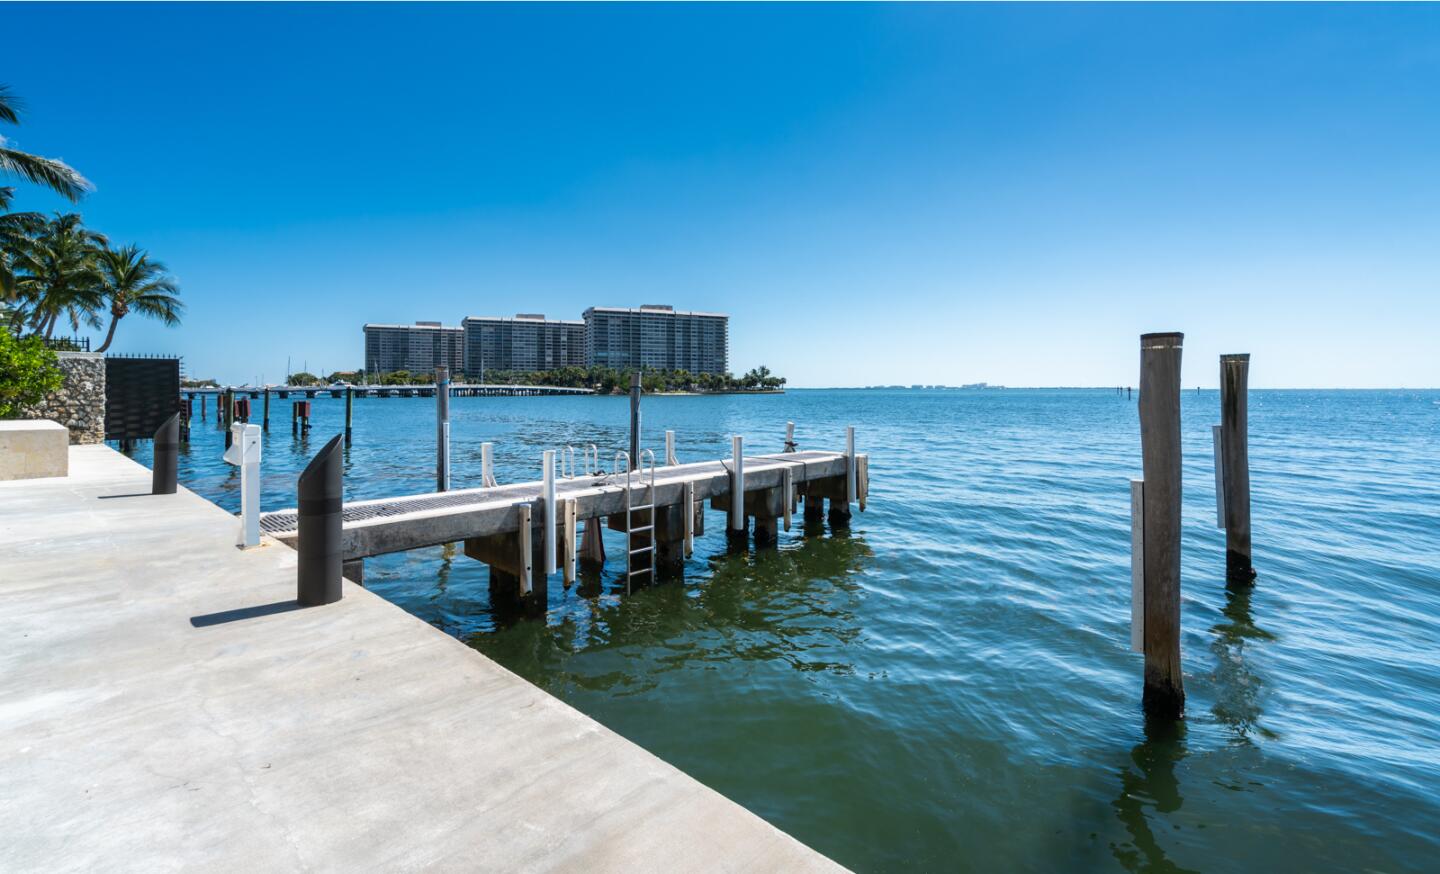 The concrete dock and its ocean view.